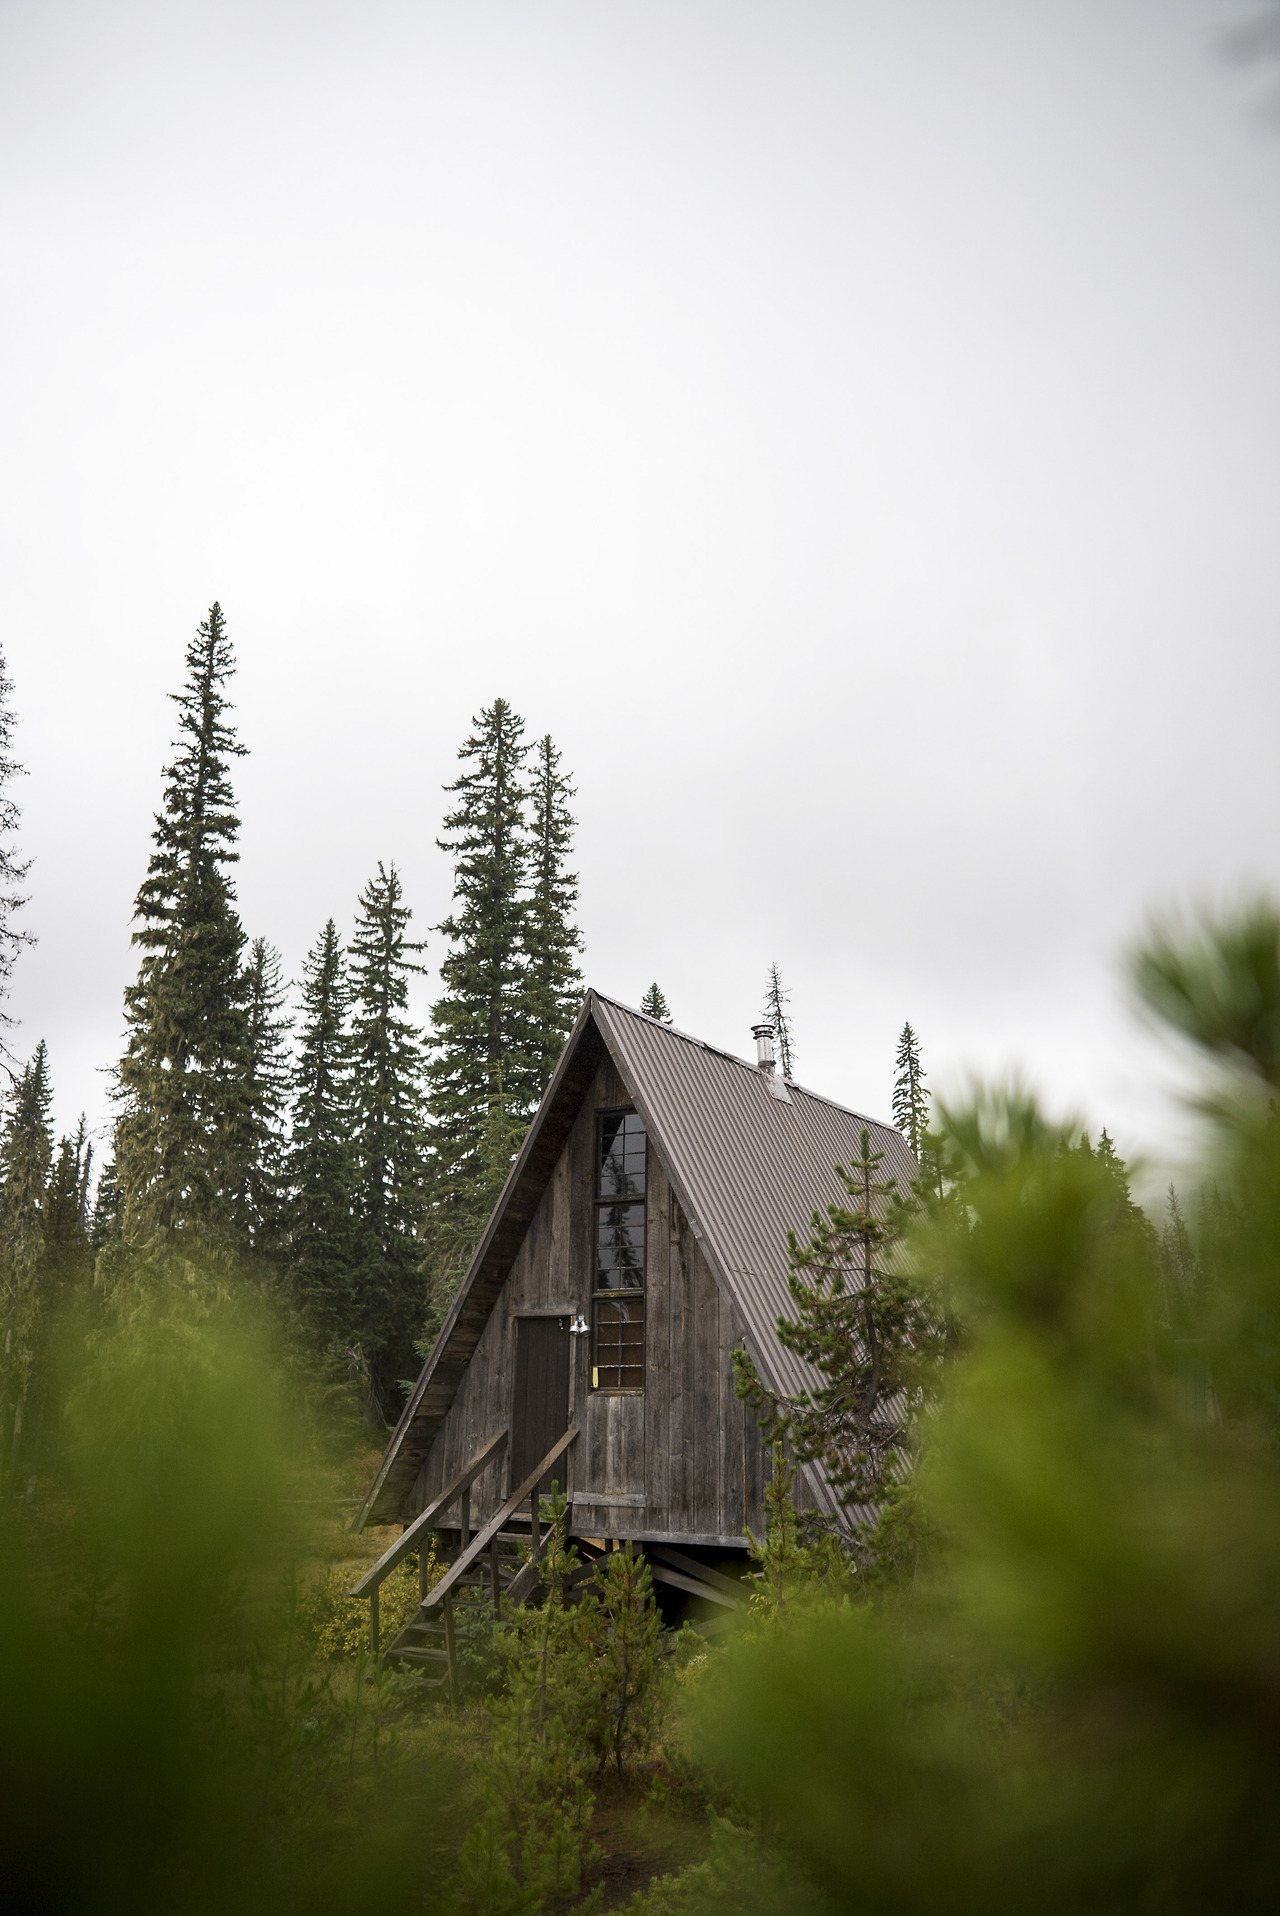 This is a rustic A-frame is just outside the Hoodoo ski area in Central Oregon.
No real driveway, just nested amongst the trees and fog.
Brett Edwards / @shredwardz